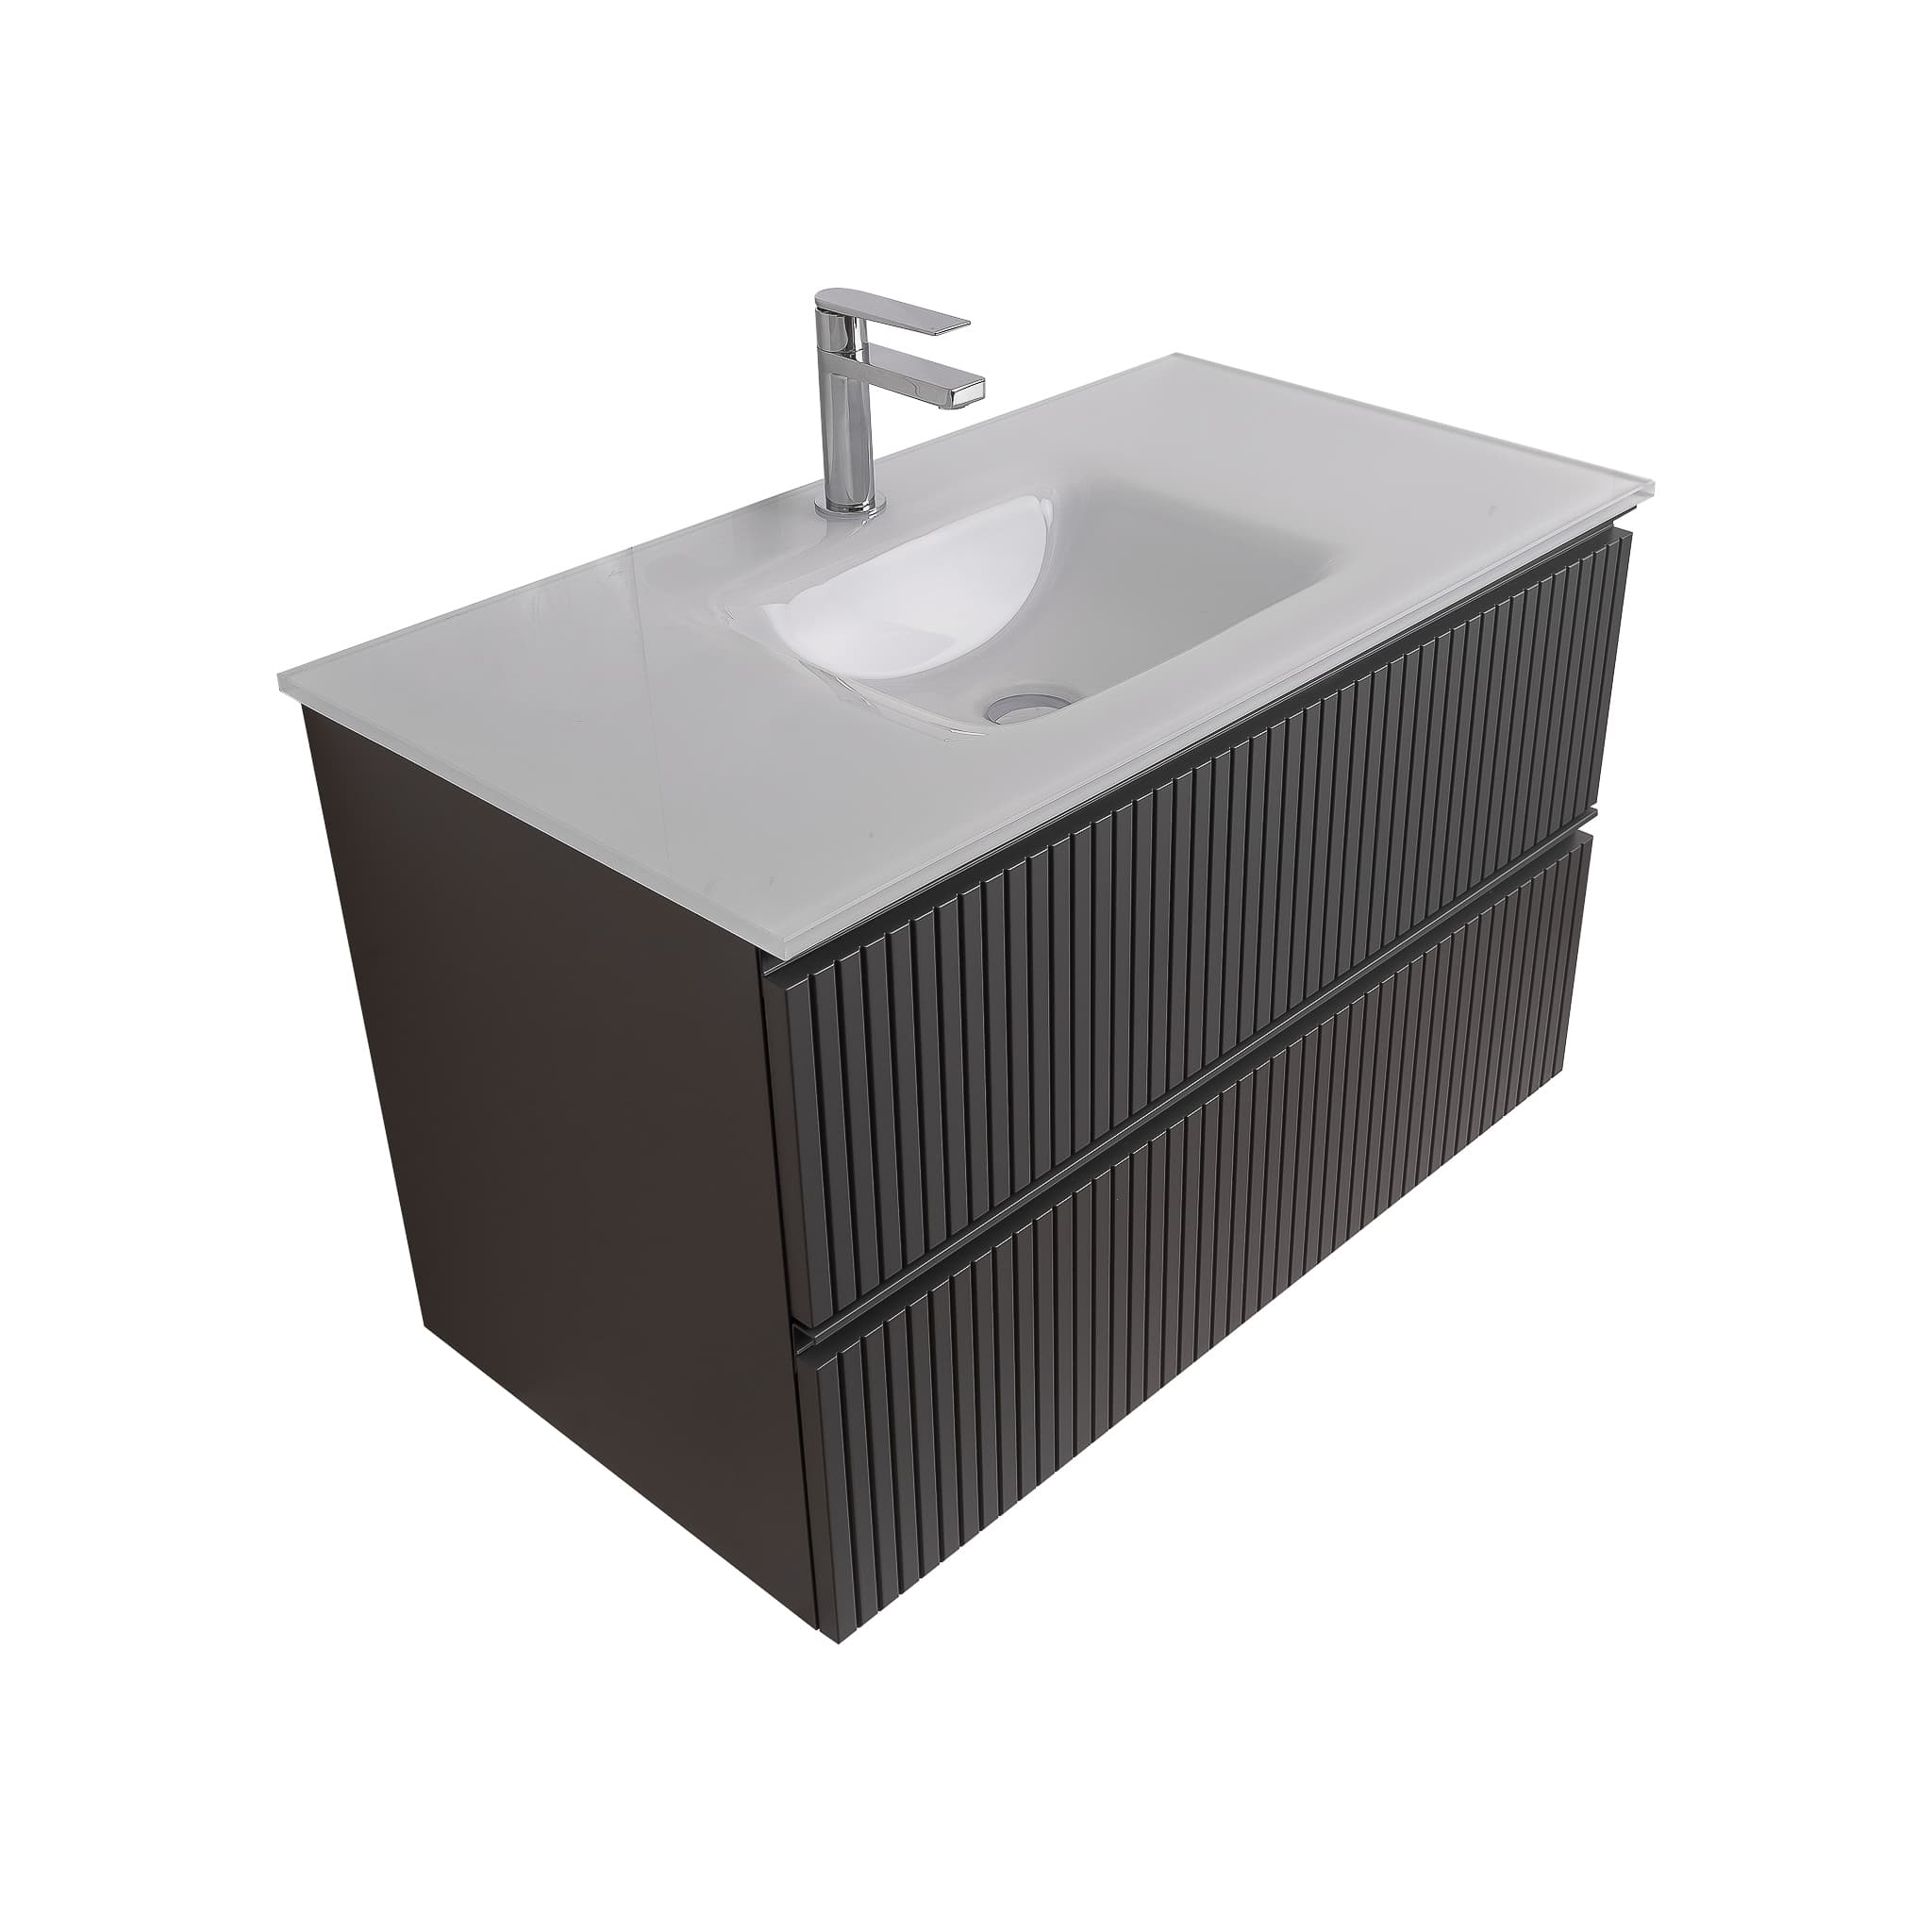 Ares 35.5 Matte Grey Cabinet, White Tempered Glass Sink, Wall Mounted Modern Vanity Set